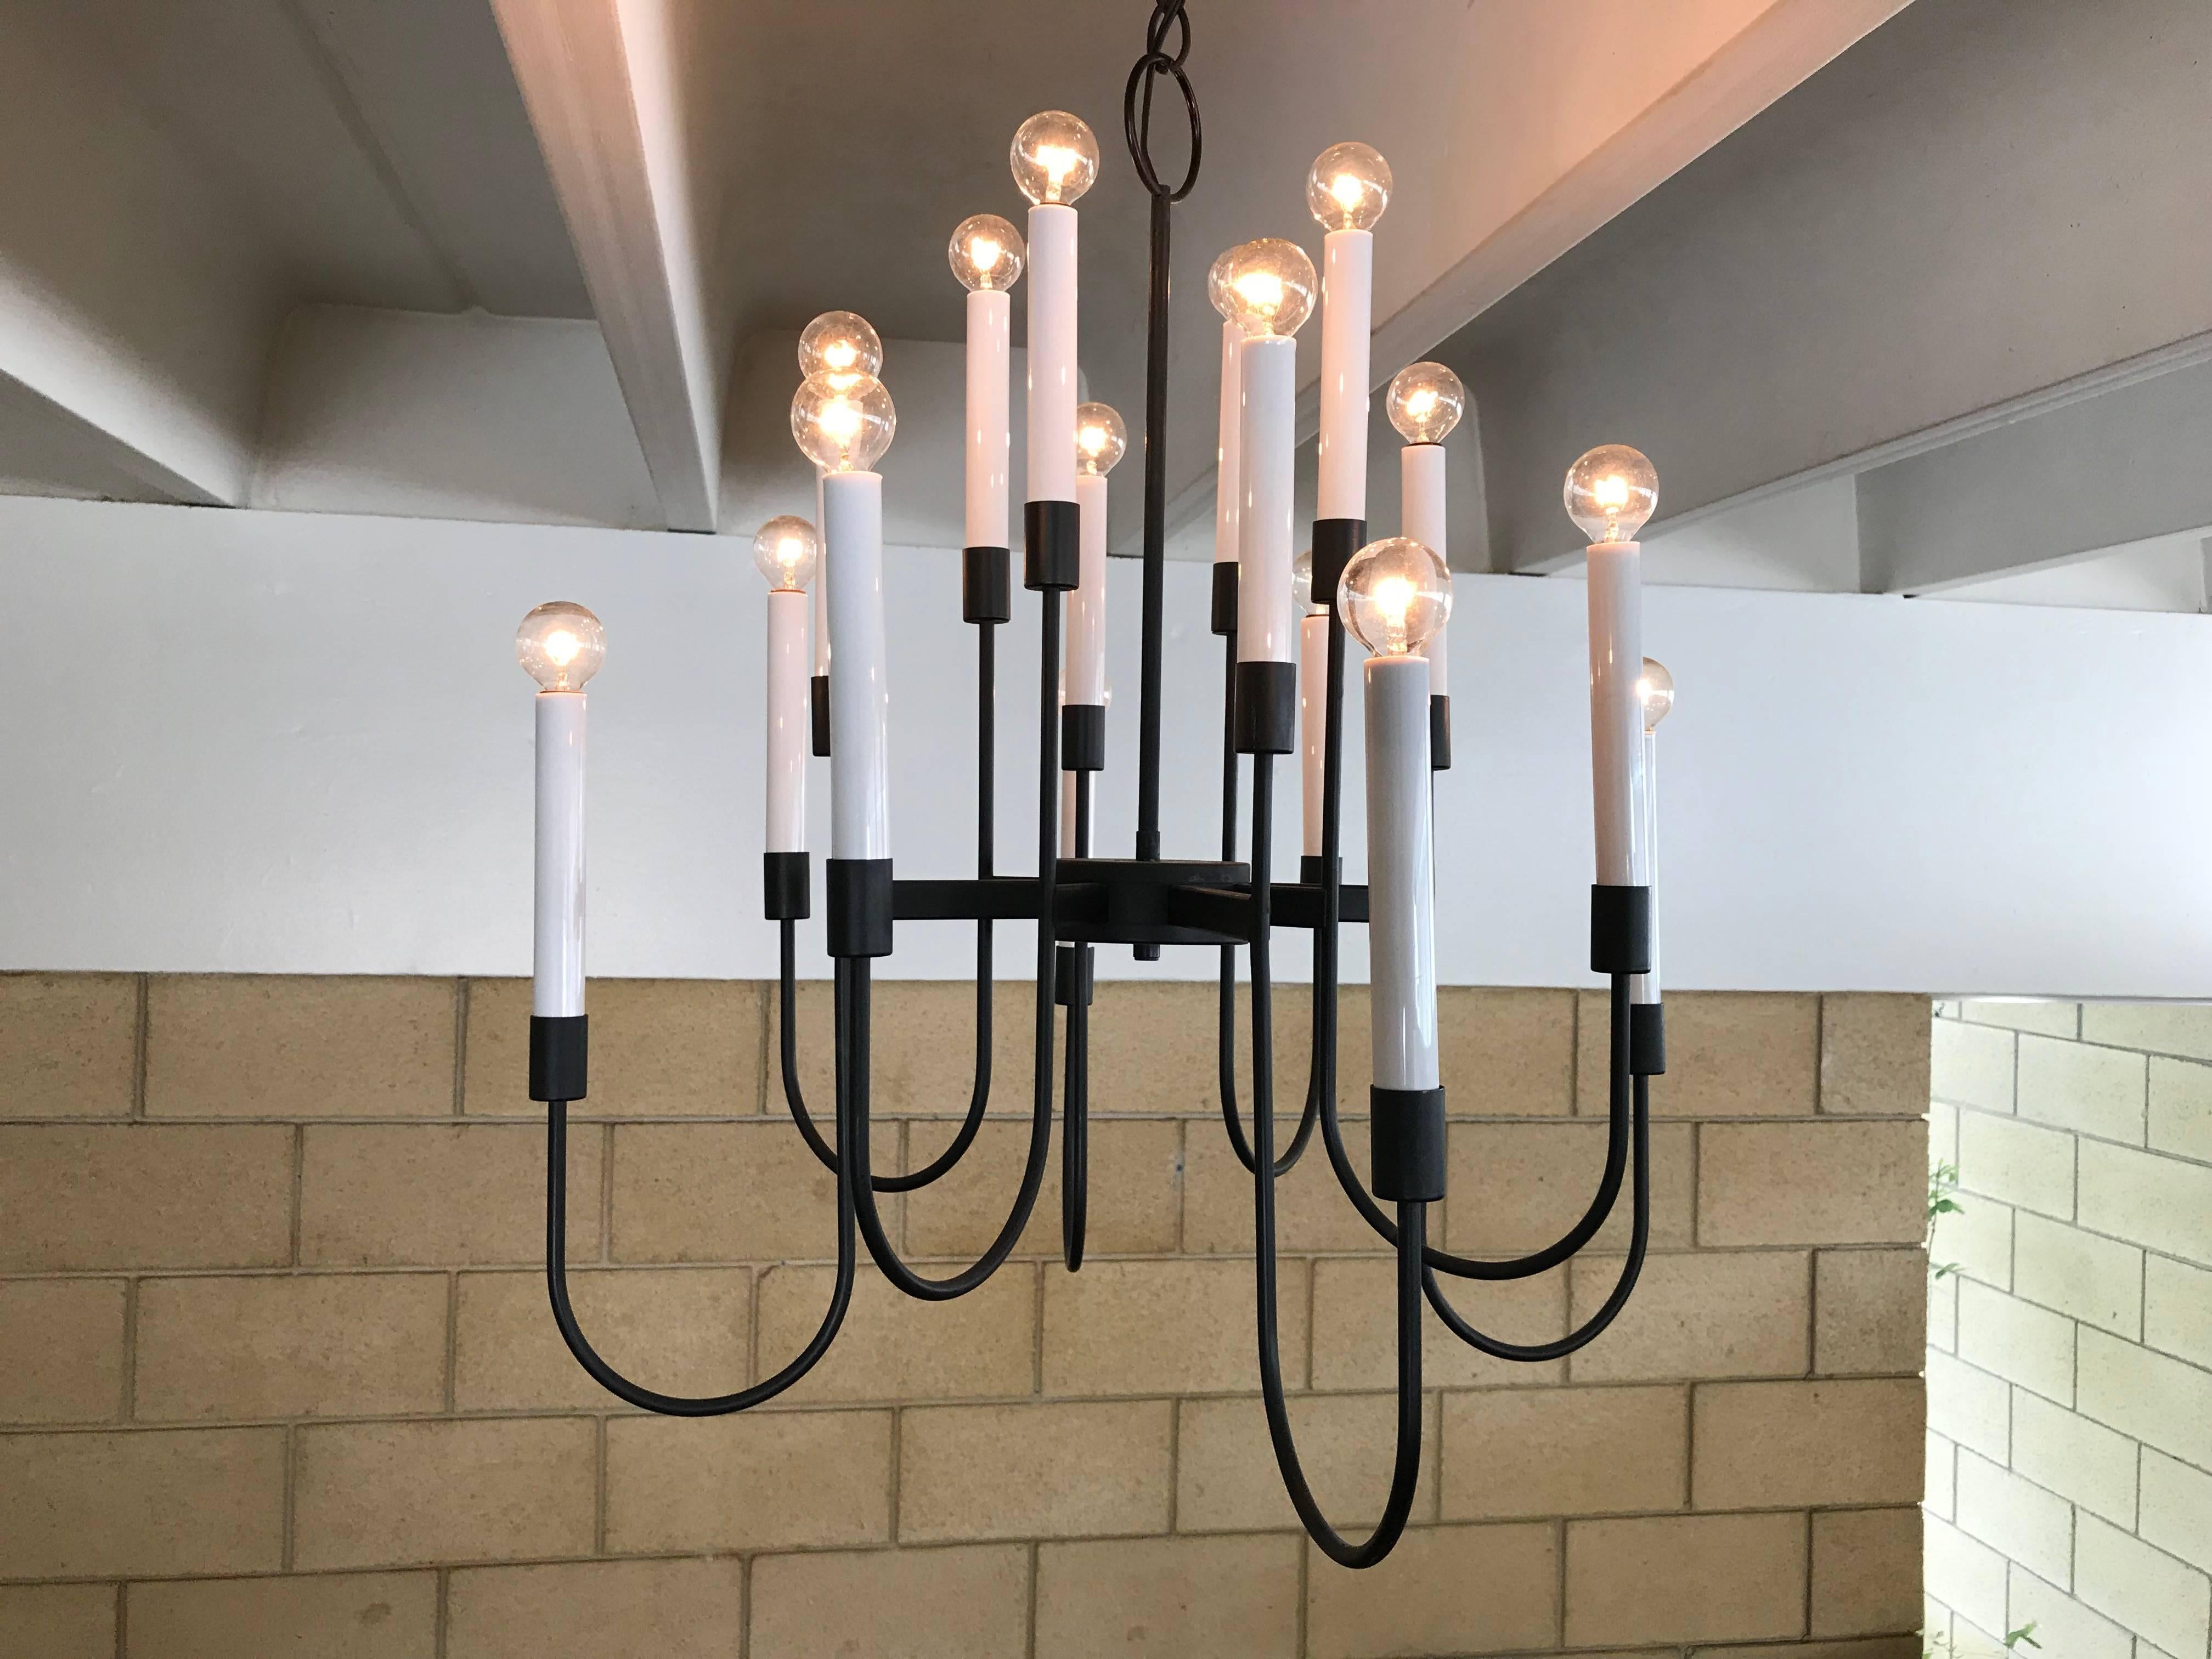 1960s Lightolier chandelier - these have 16 bulbs and any bulb style will work; round, candle-flame, frosted, etc. I prefer these with small round bulbs. The bulbs are included if you want them. The black enamel paint has some very hard-to-see